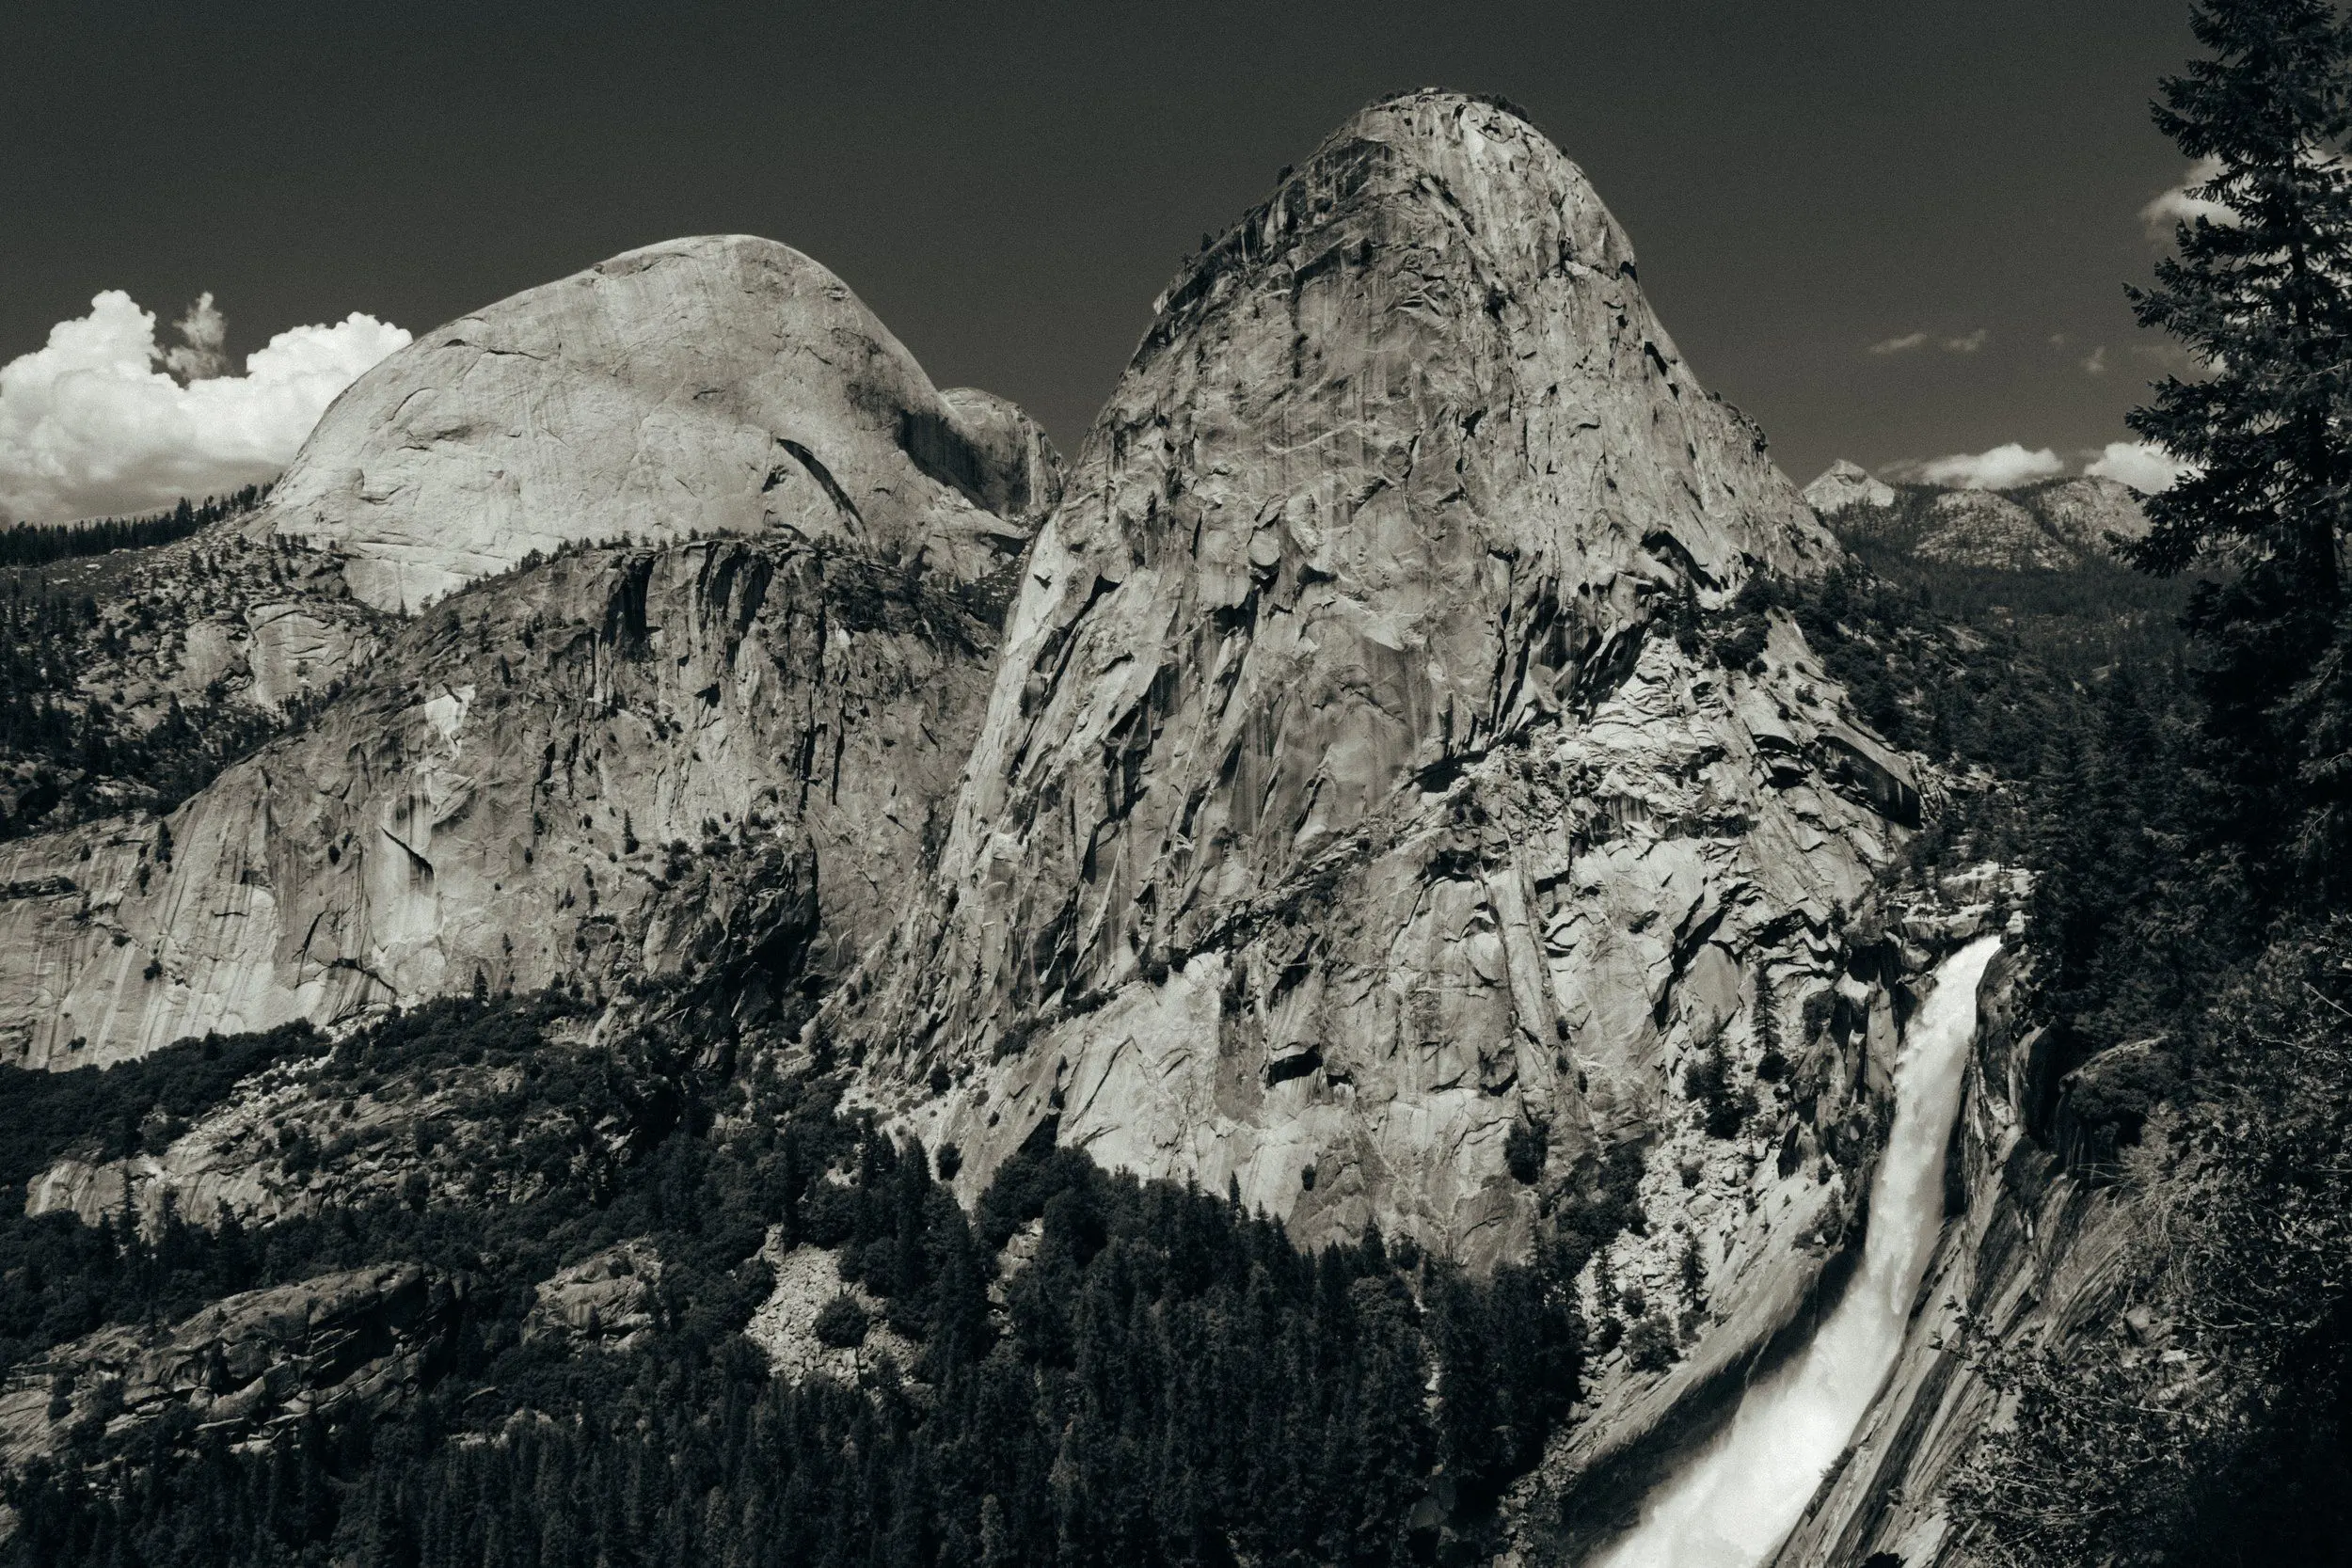 Wide aerial monochromatic shot of Half Dome, Mount Broderick, Liberty Cap, and Nevada Fall.